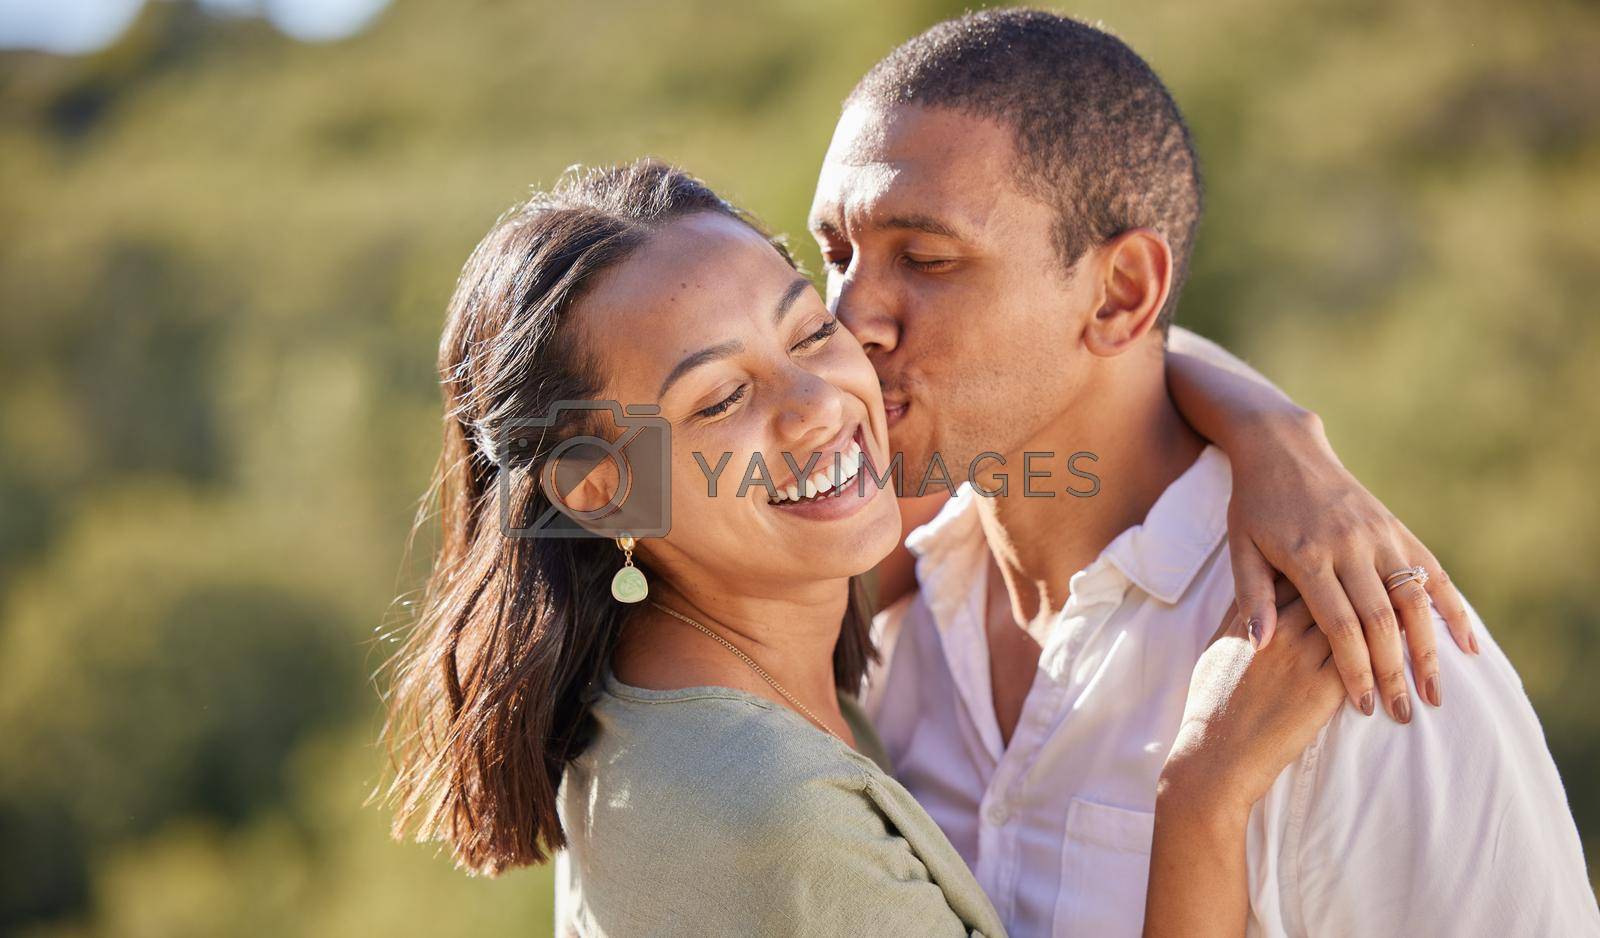 Happy black woman and man couple kiss, love and dating in relationship summer nature romance date. Hug, embrace and romantic black couple smile, kissing and happiness on vacation or holiday together.